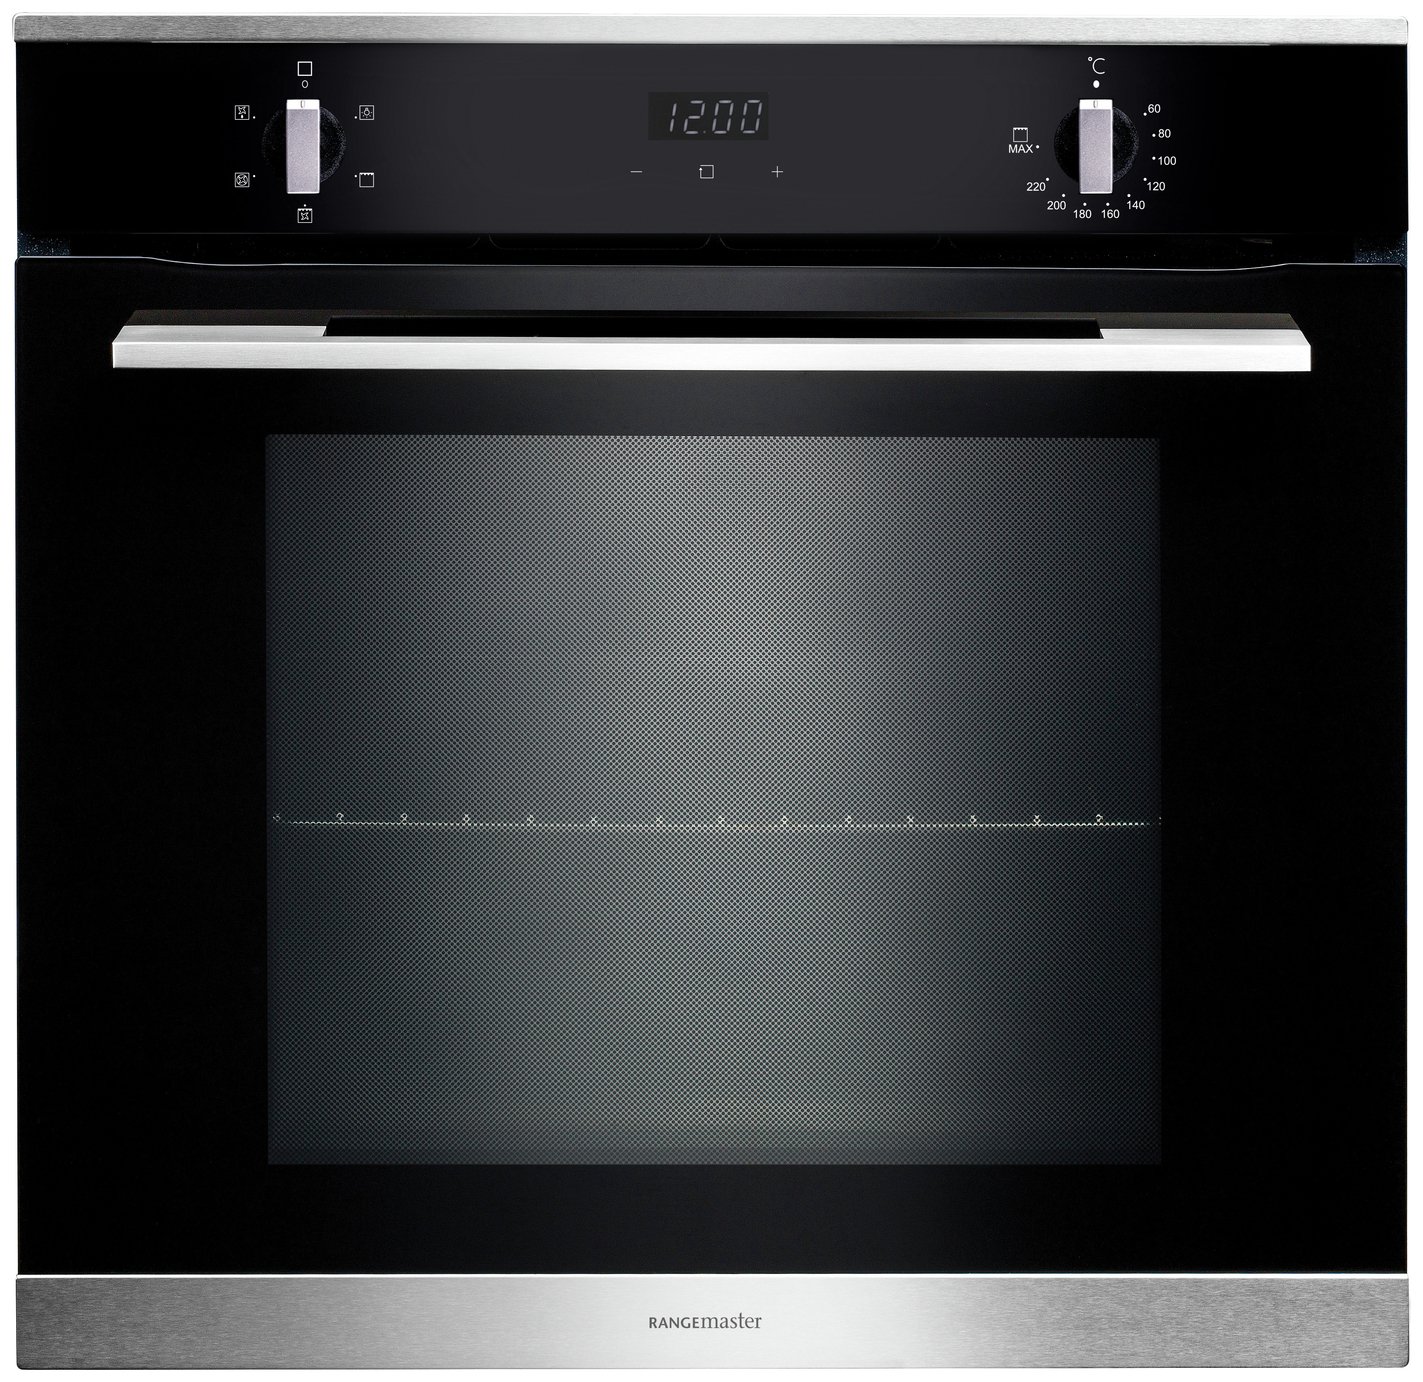 Rangemaster RMB605BL/SS Built In Electric Oven - Black